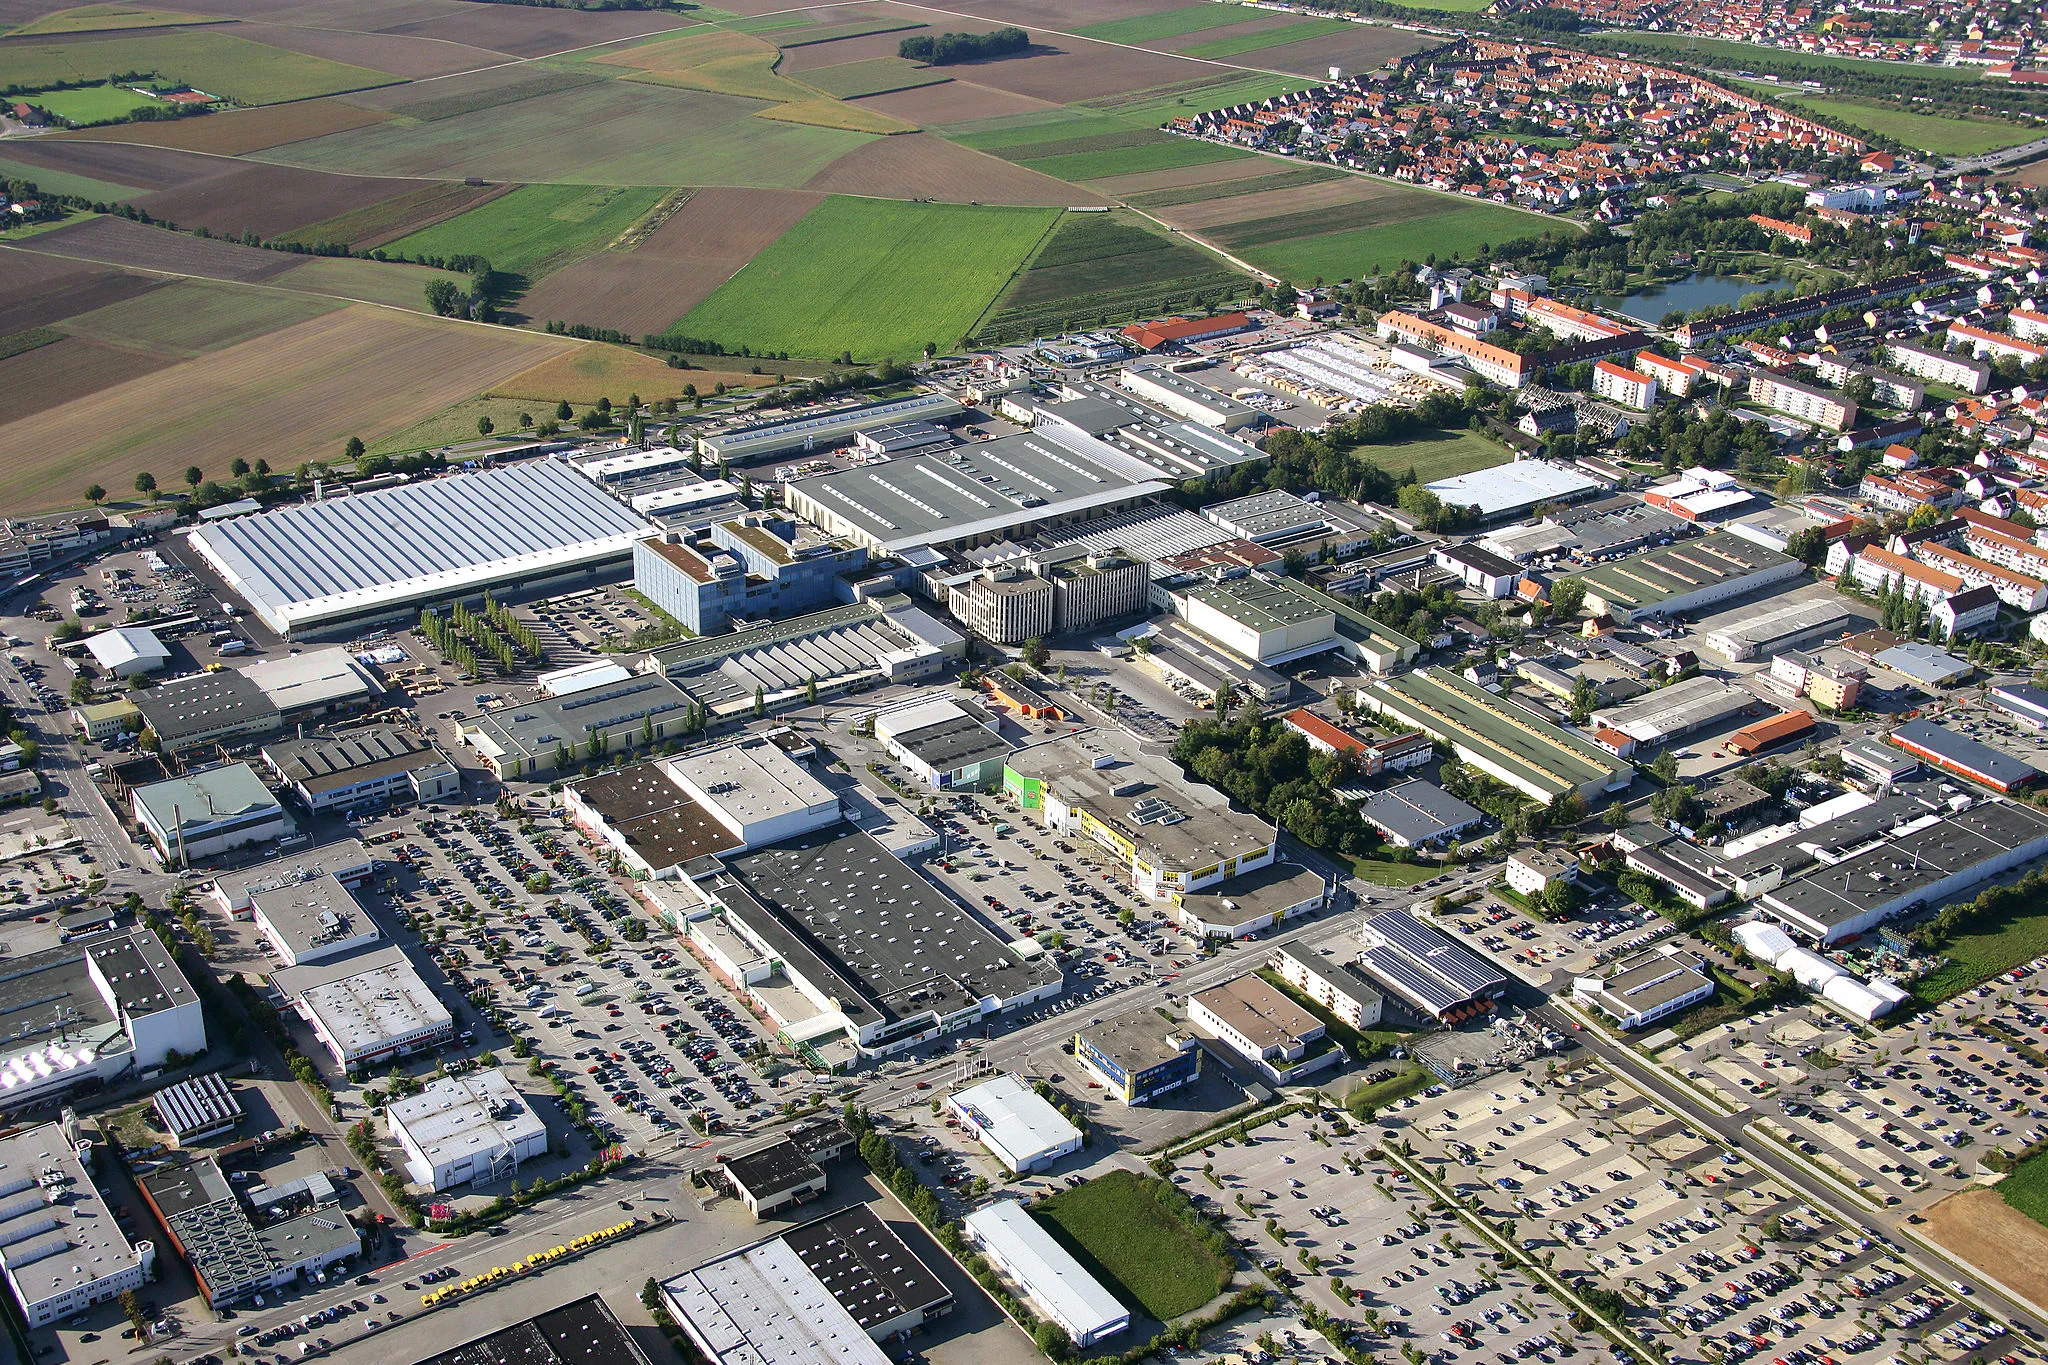 Photo showing: Aerial view of Krones plant grounds in Neutraubling